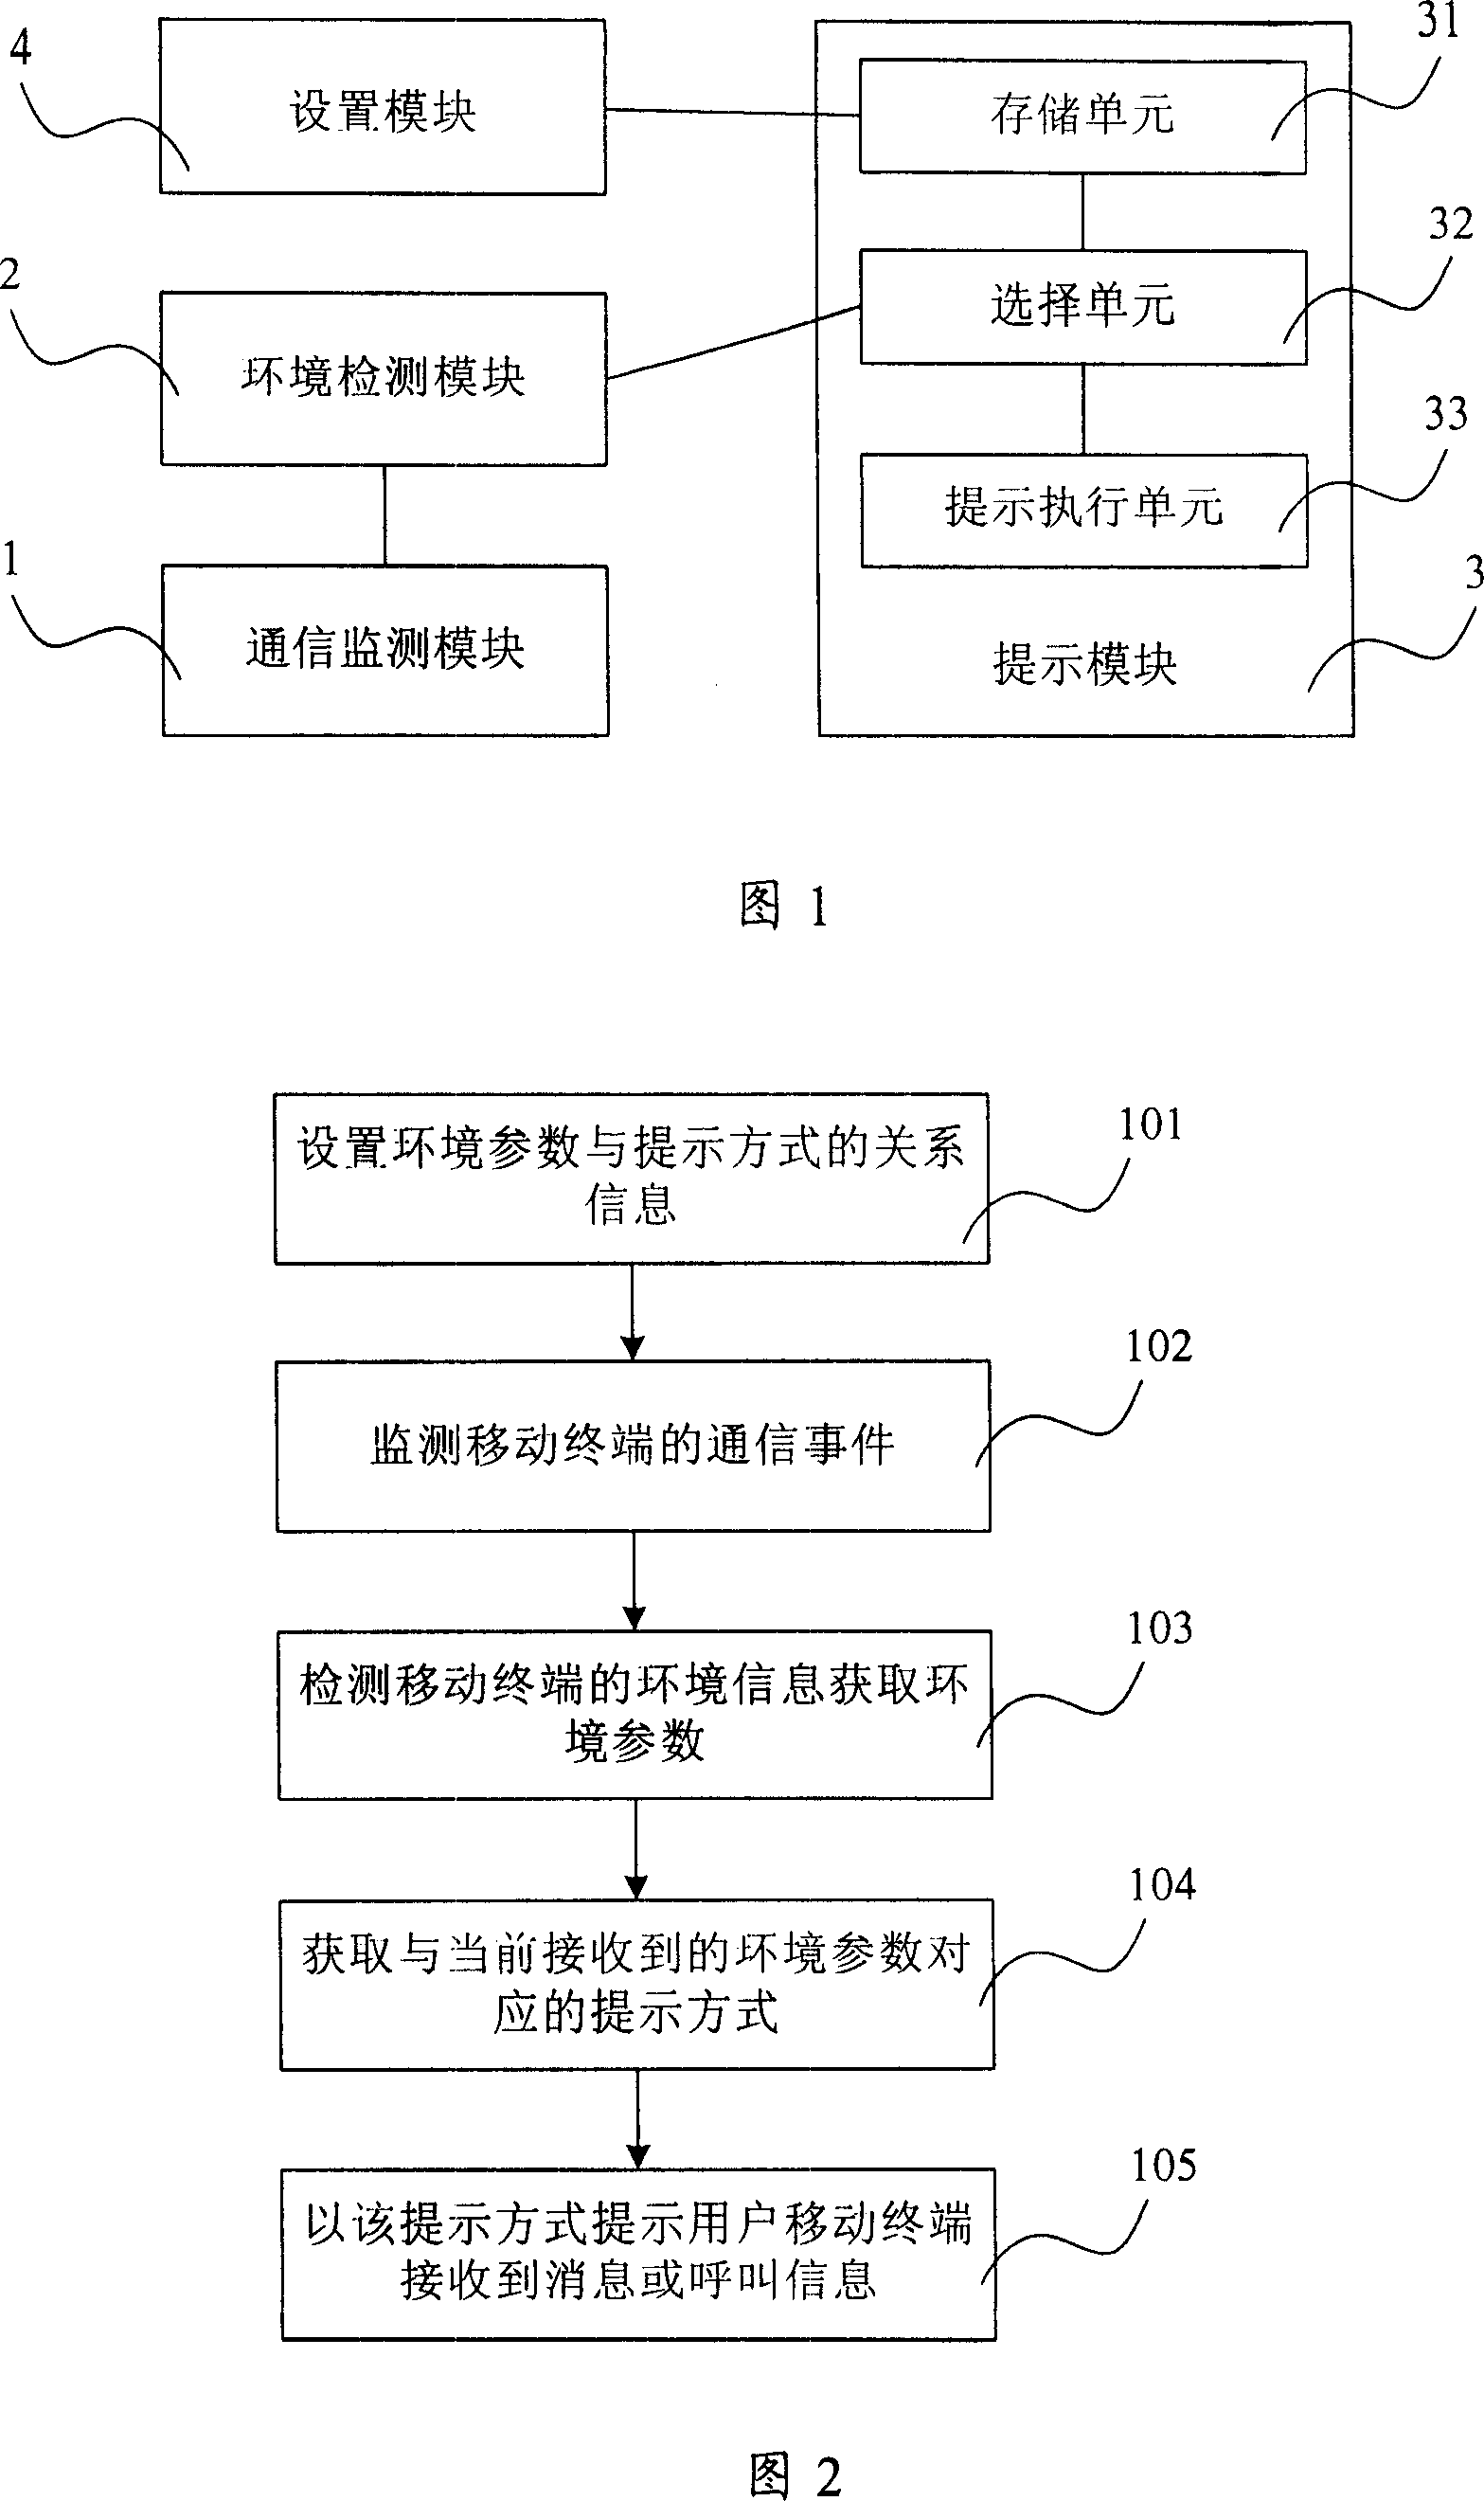 Mobile terminal and its communication event prompt method